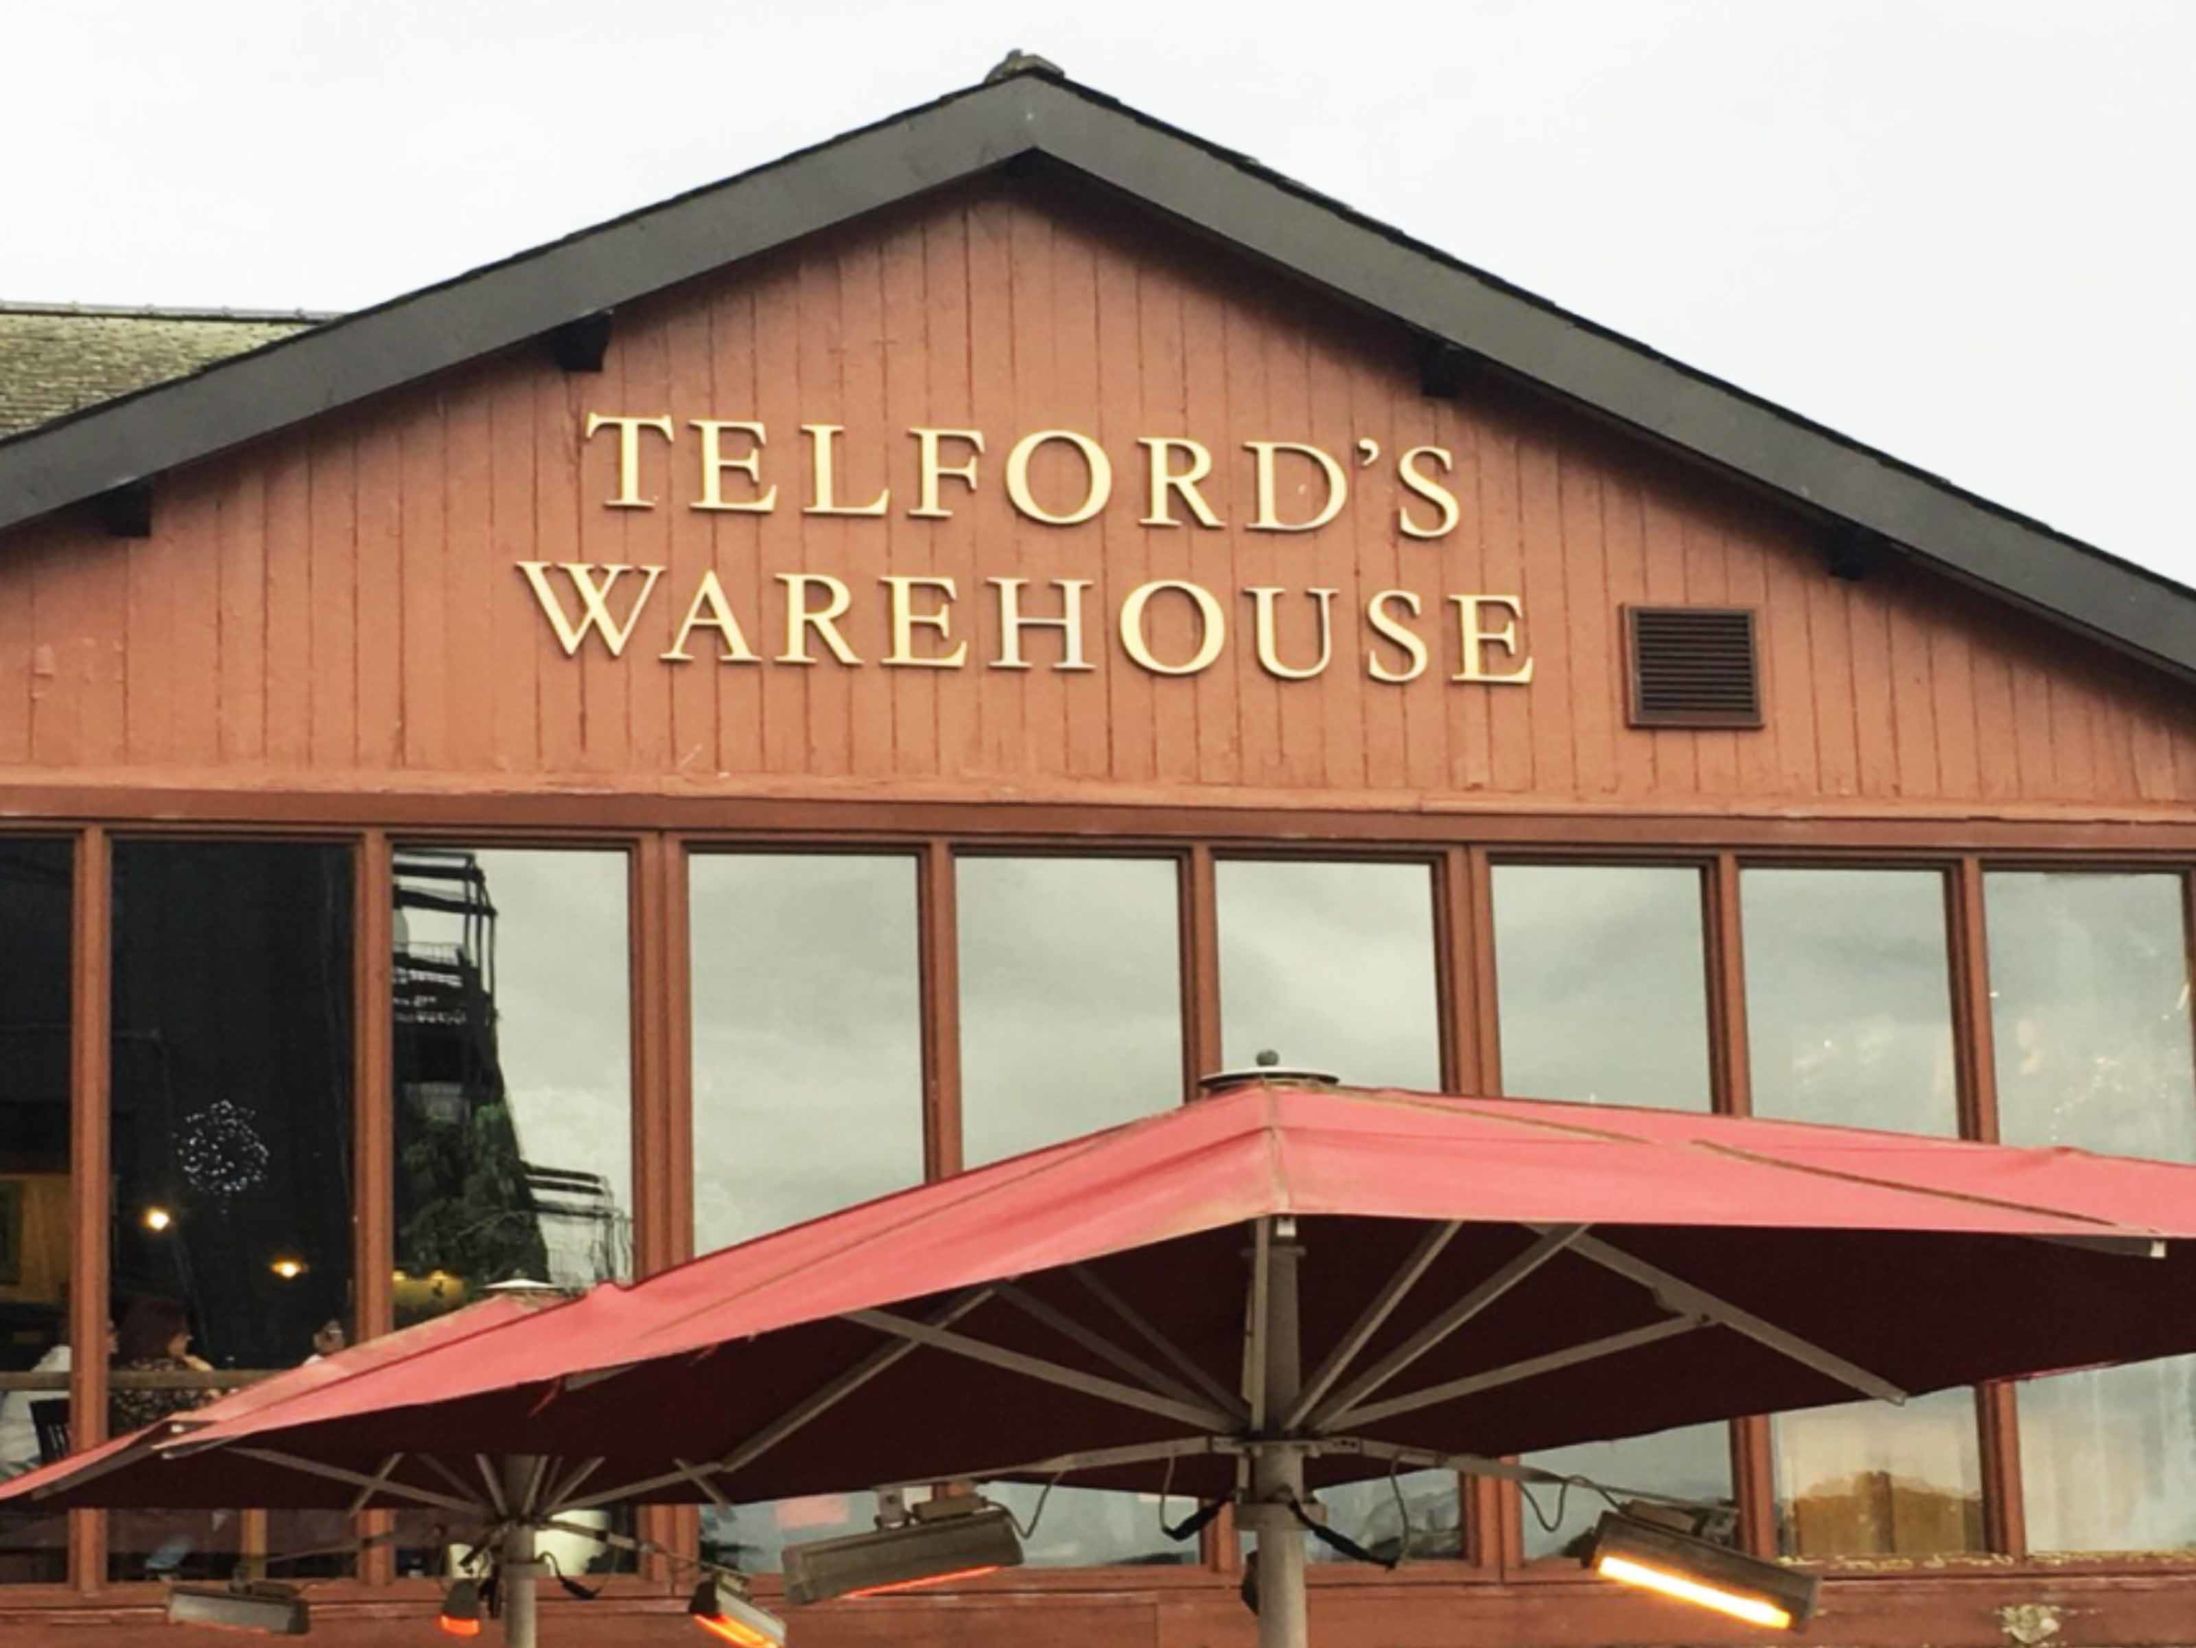 Chester Bars for a Working Lunch - Telfords Warehouse